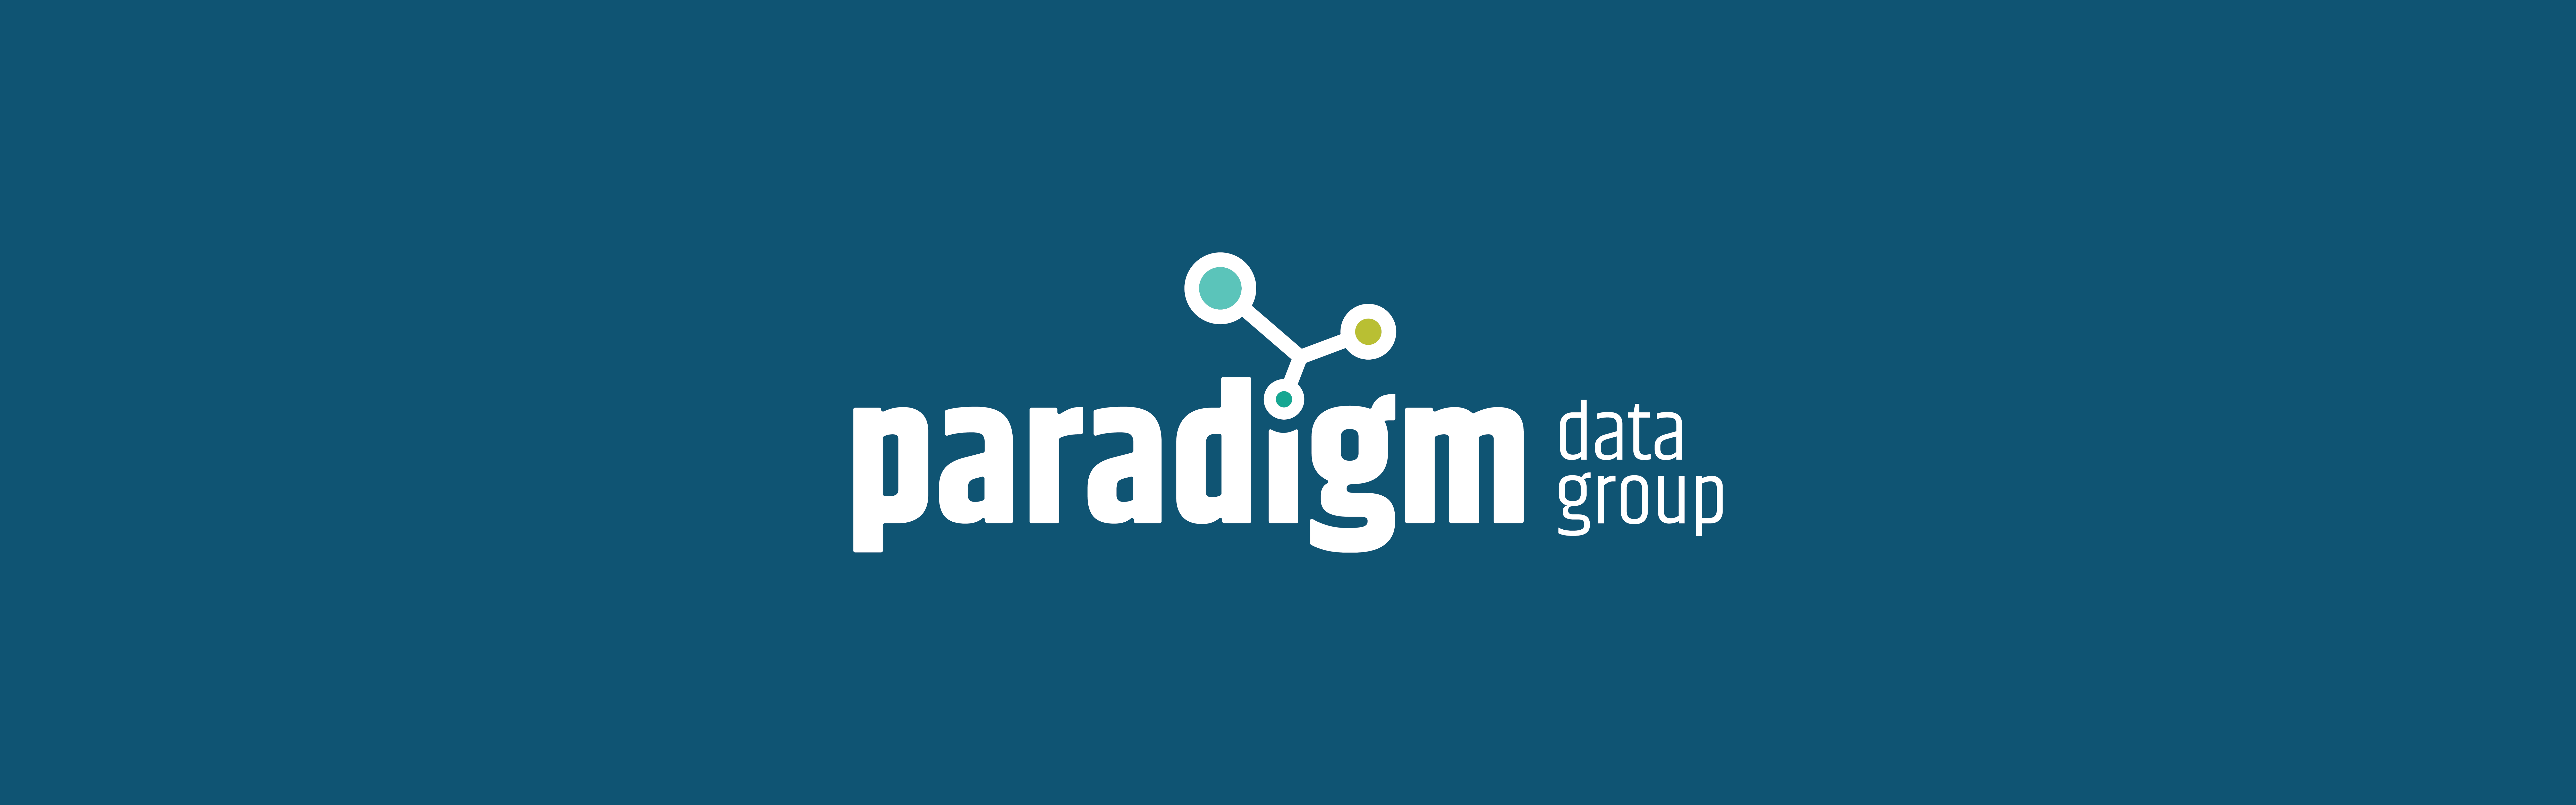 Company logo of Paradigm Data Group on a dark blue background featuring white text and a green and white graphic element that resembles a stylized circuit or connection.